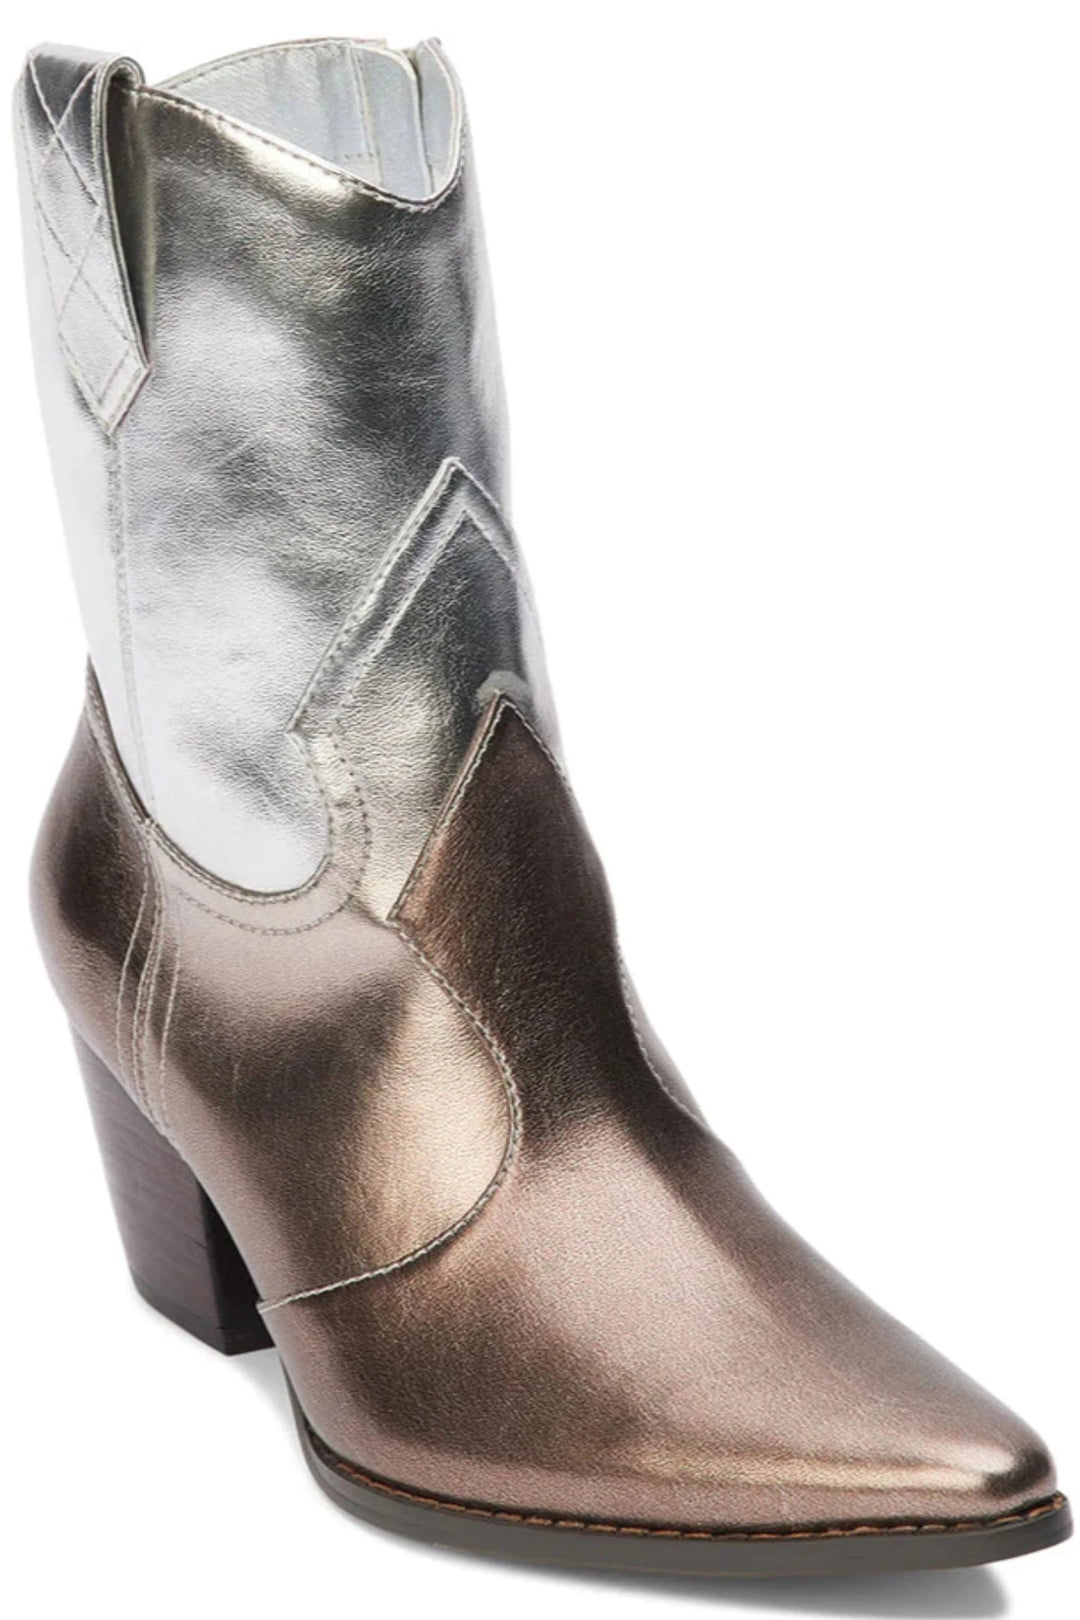 Matisse Bambi Silver Ombre Cowgirl Boots